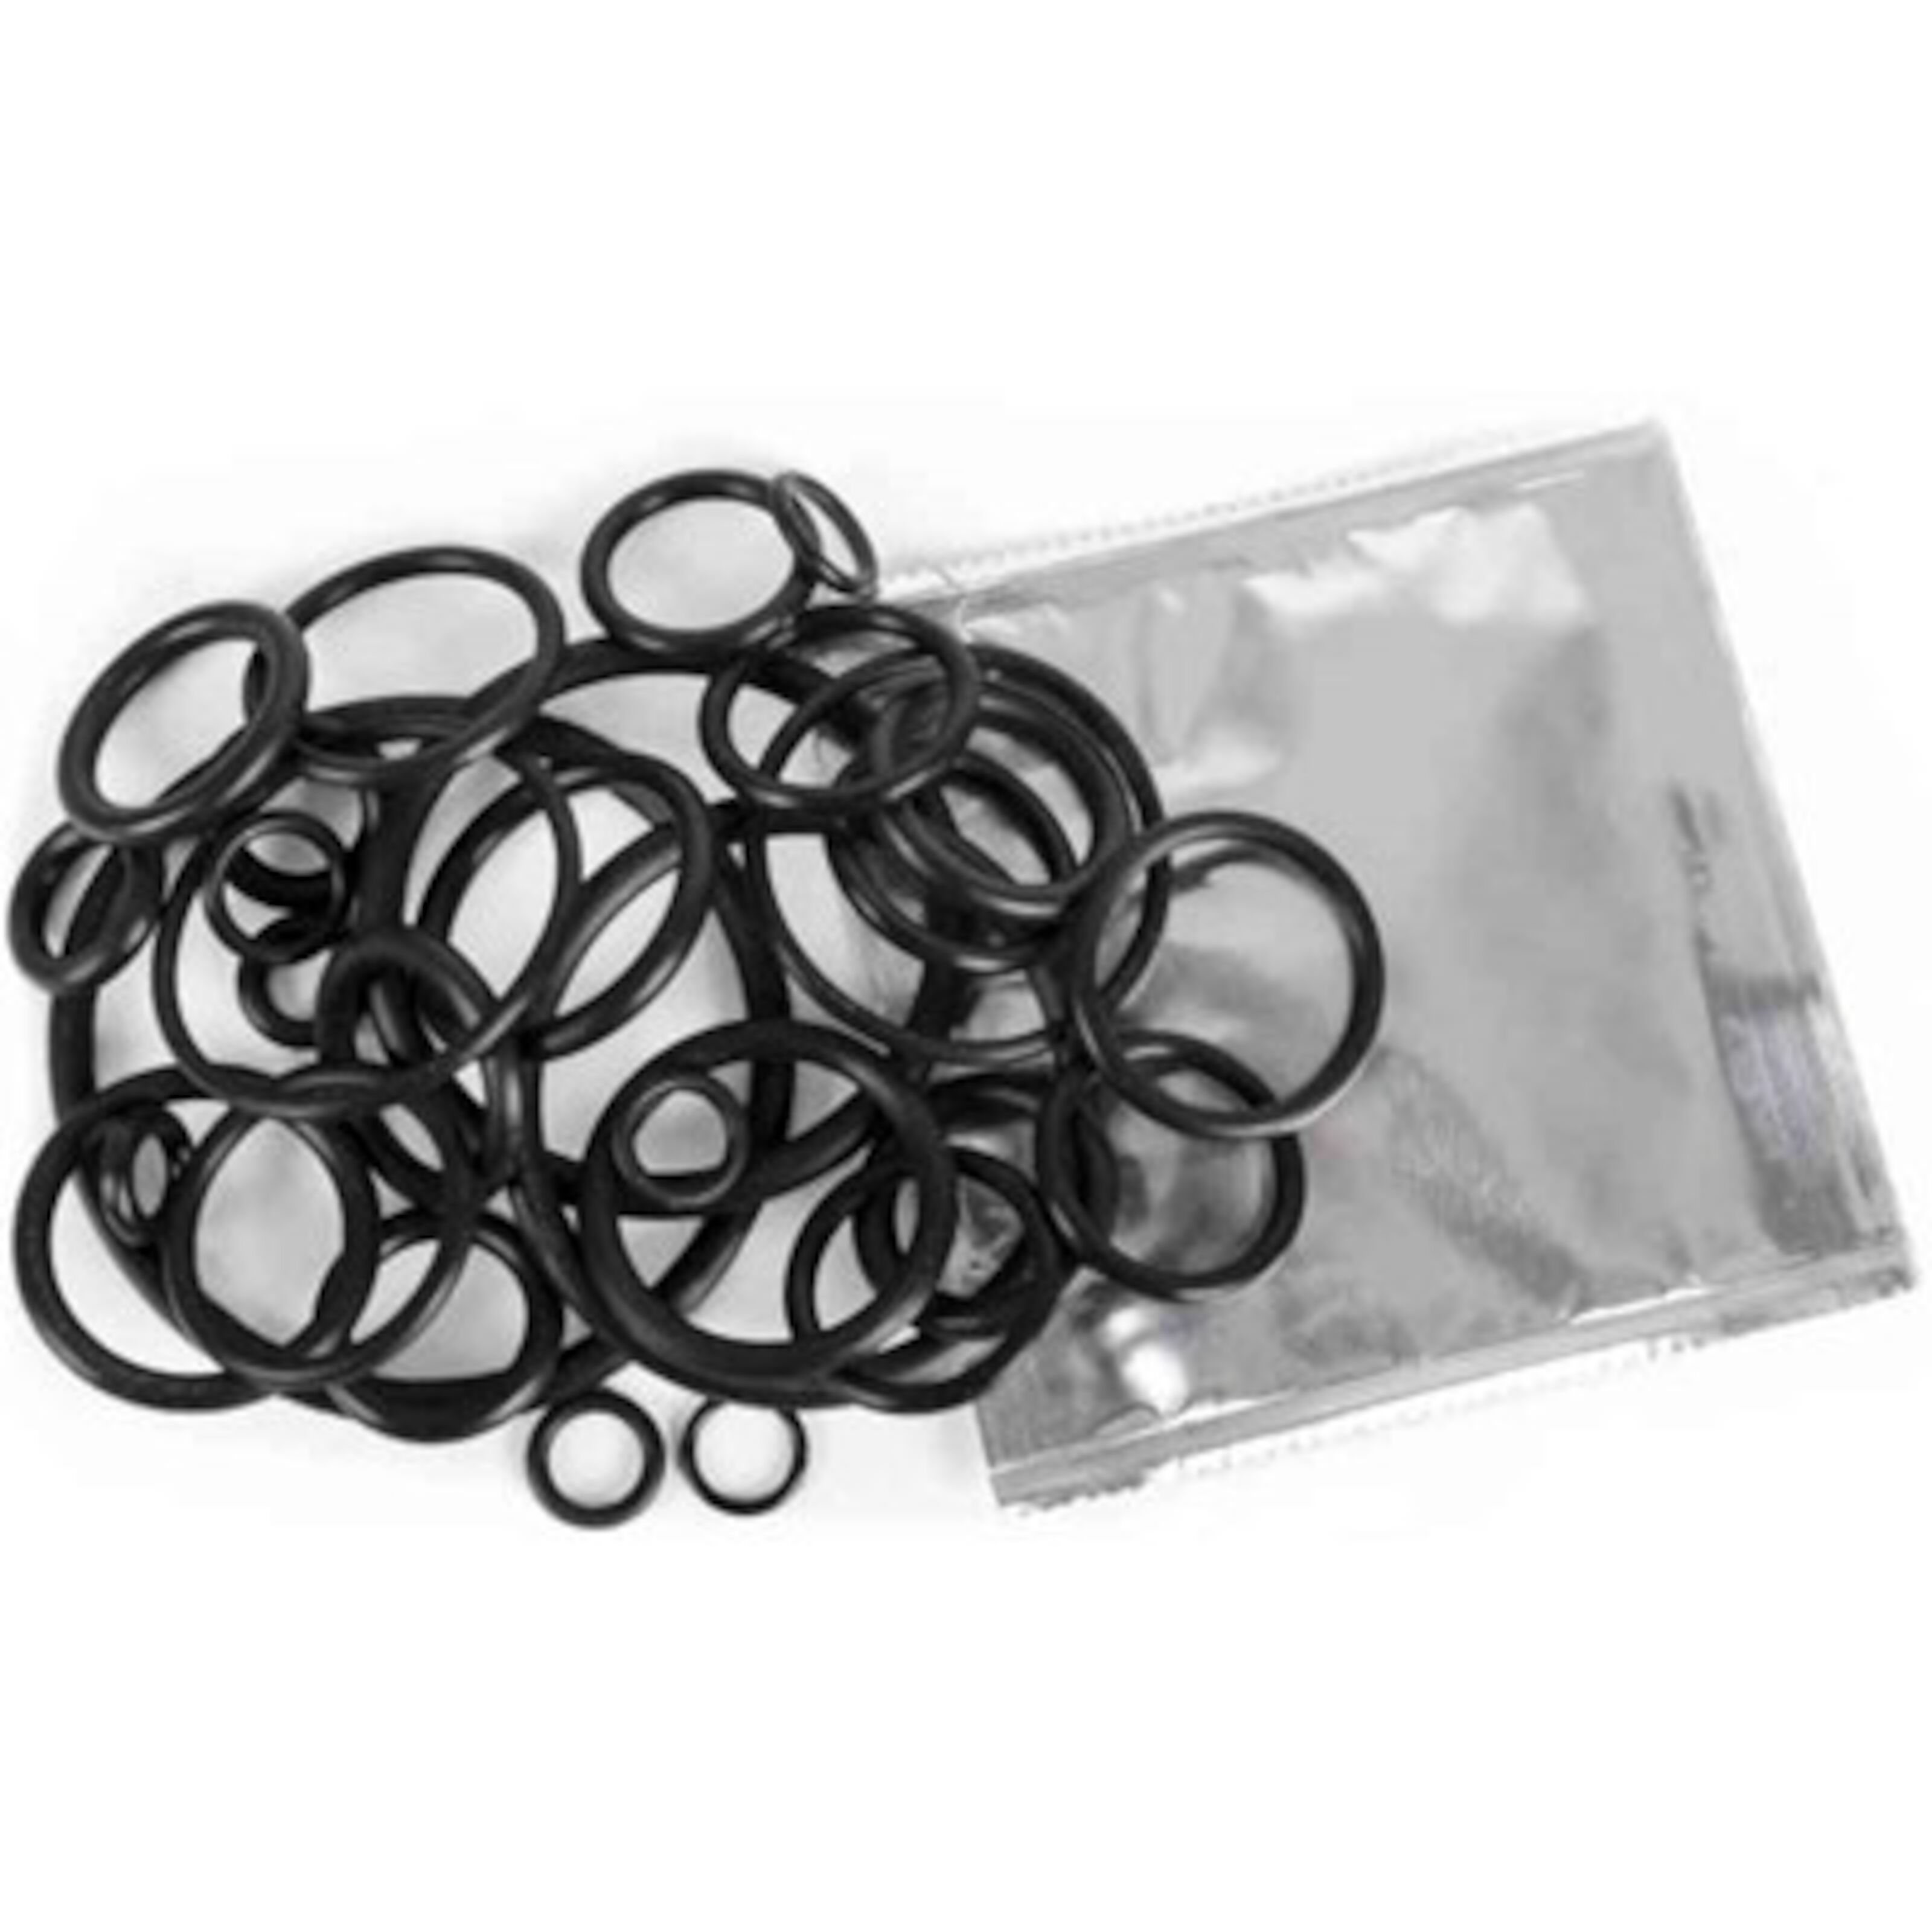 rubber 9 x 5 x 2 mm pack of 10 O rings 